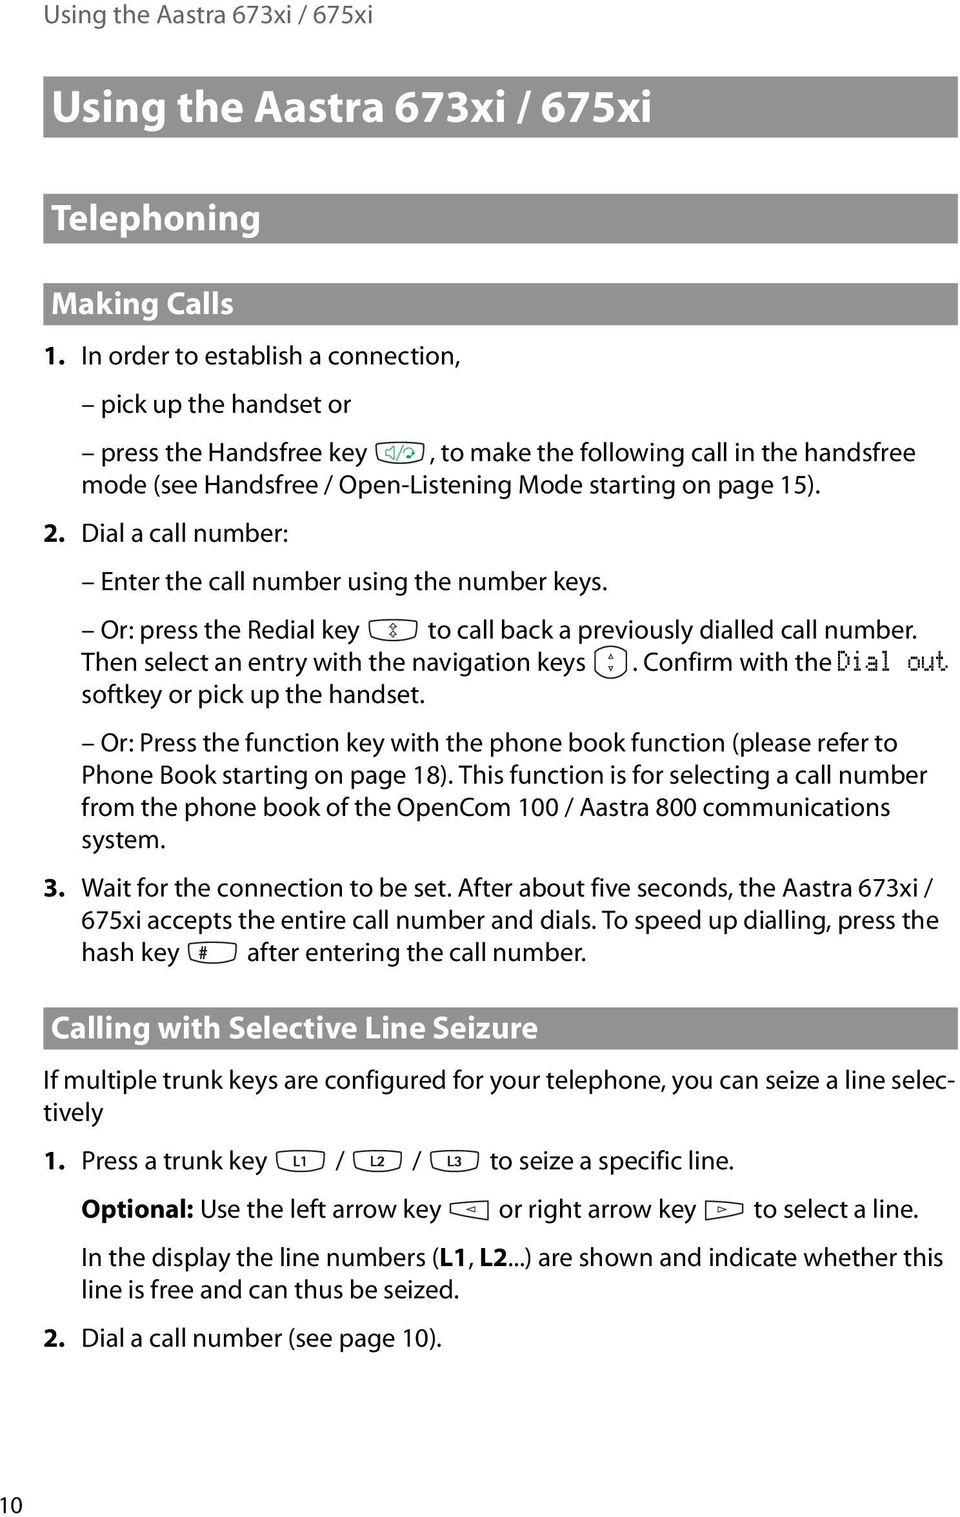 Dial a call number: Enter the call number using the number keys. Or: press the Redial key to call back a previously dialled call number. Then select an entry with the navigation keys.